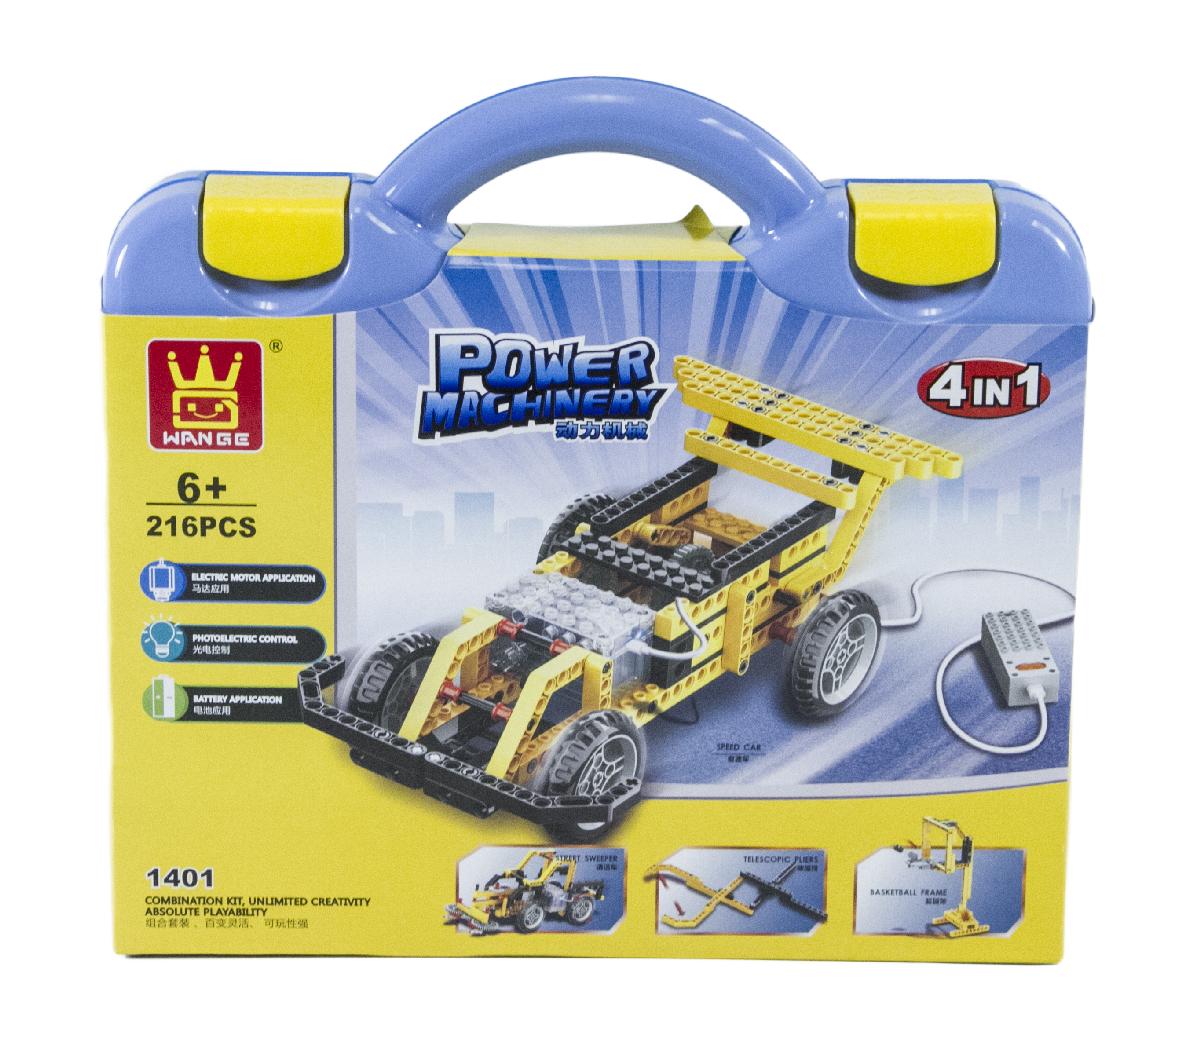 4in1 Power Machinery Speed Car Set (216 Pieces) - 4in1 Speed Car, Street Sweeper, Telescopic Pliers, Basketball Frame